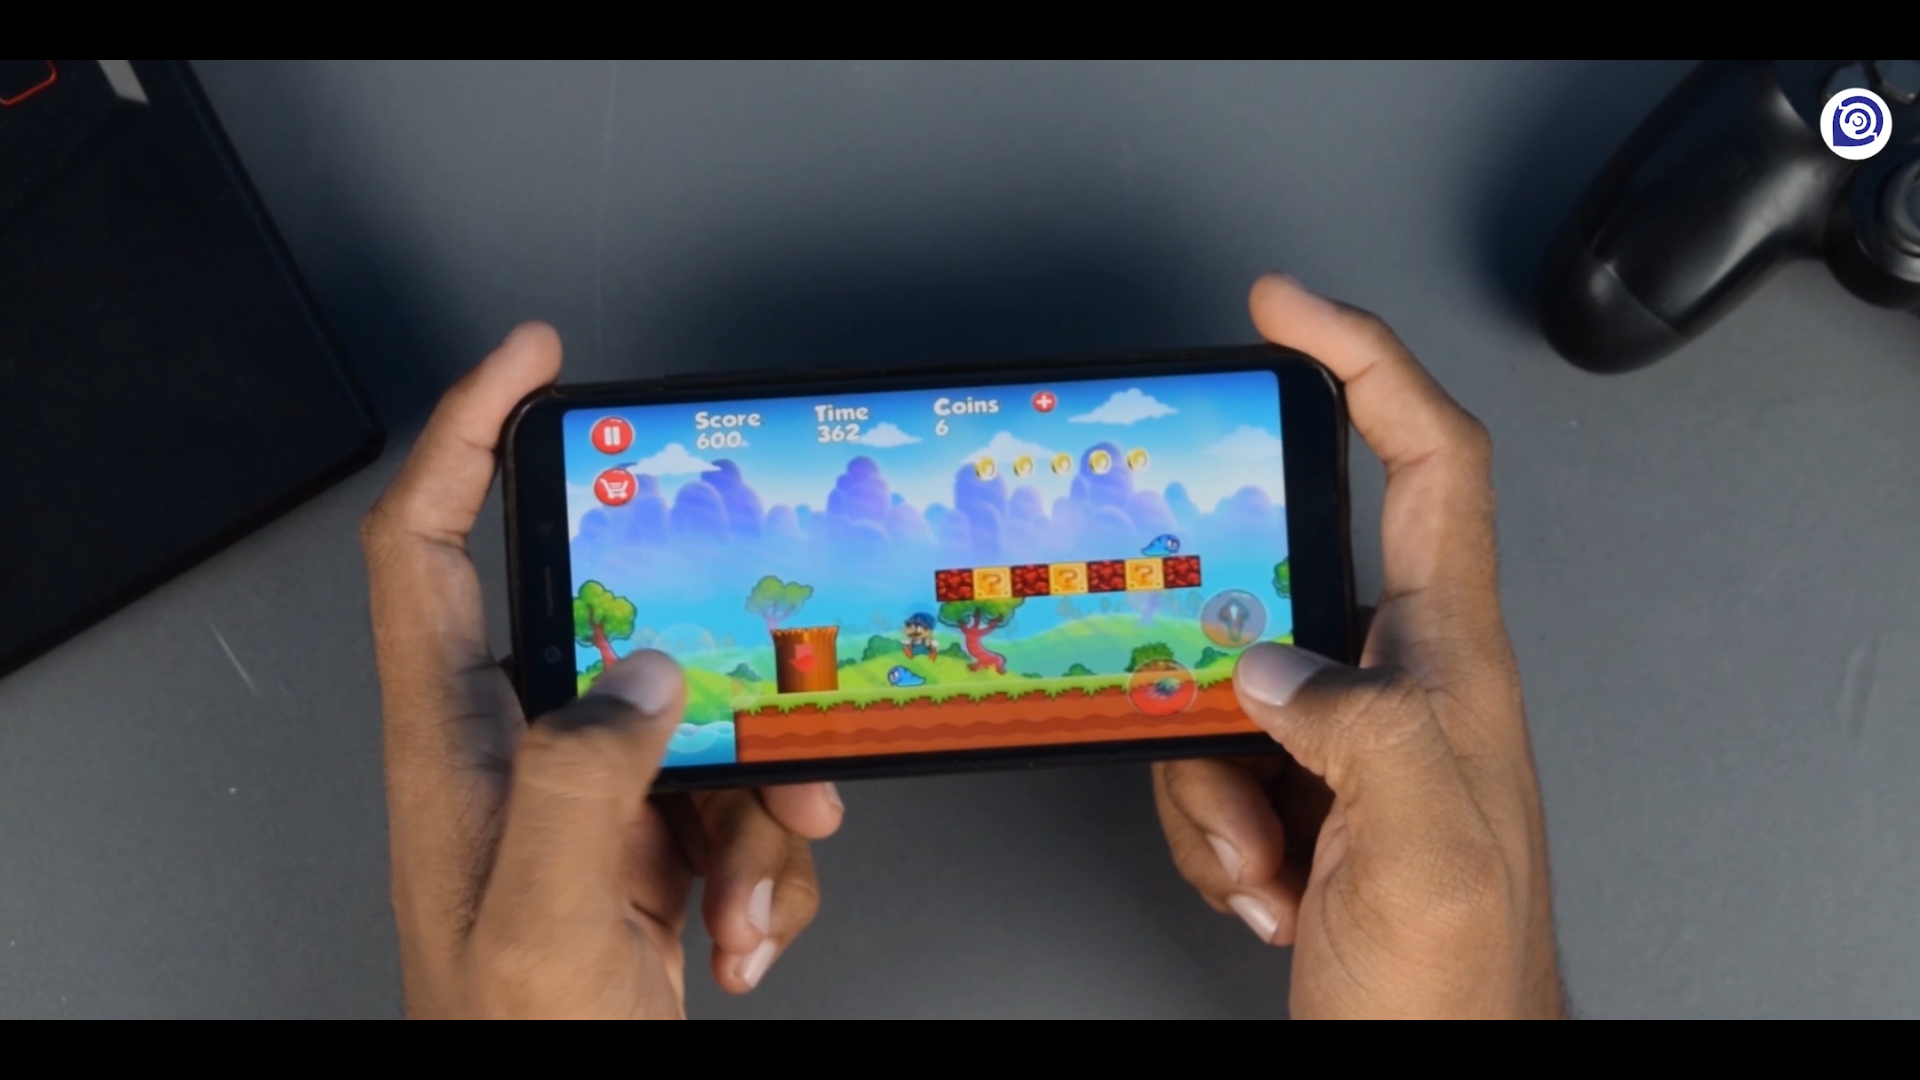 Old School Super Mario on Android?